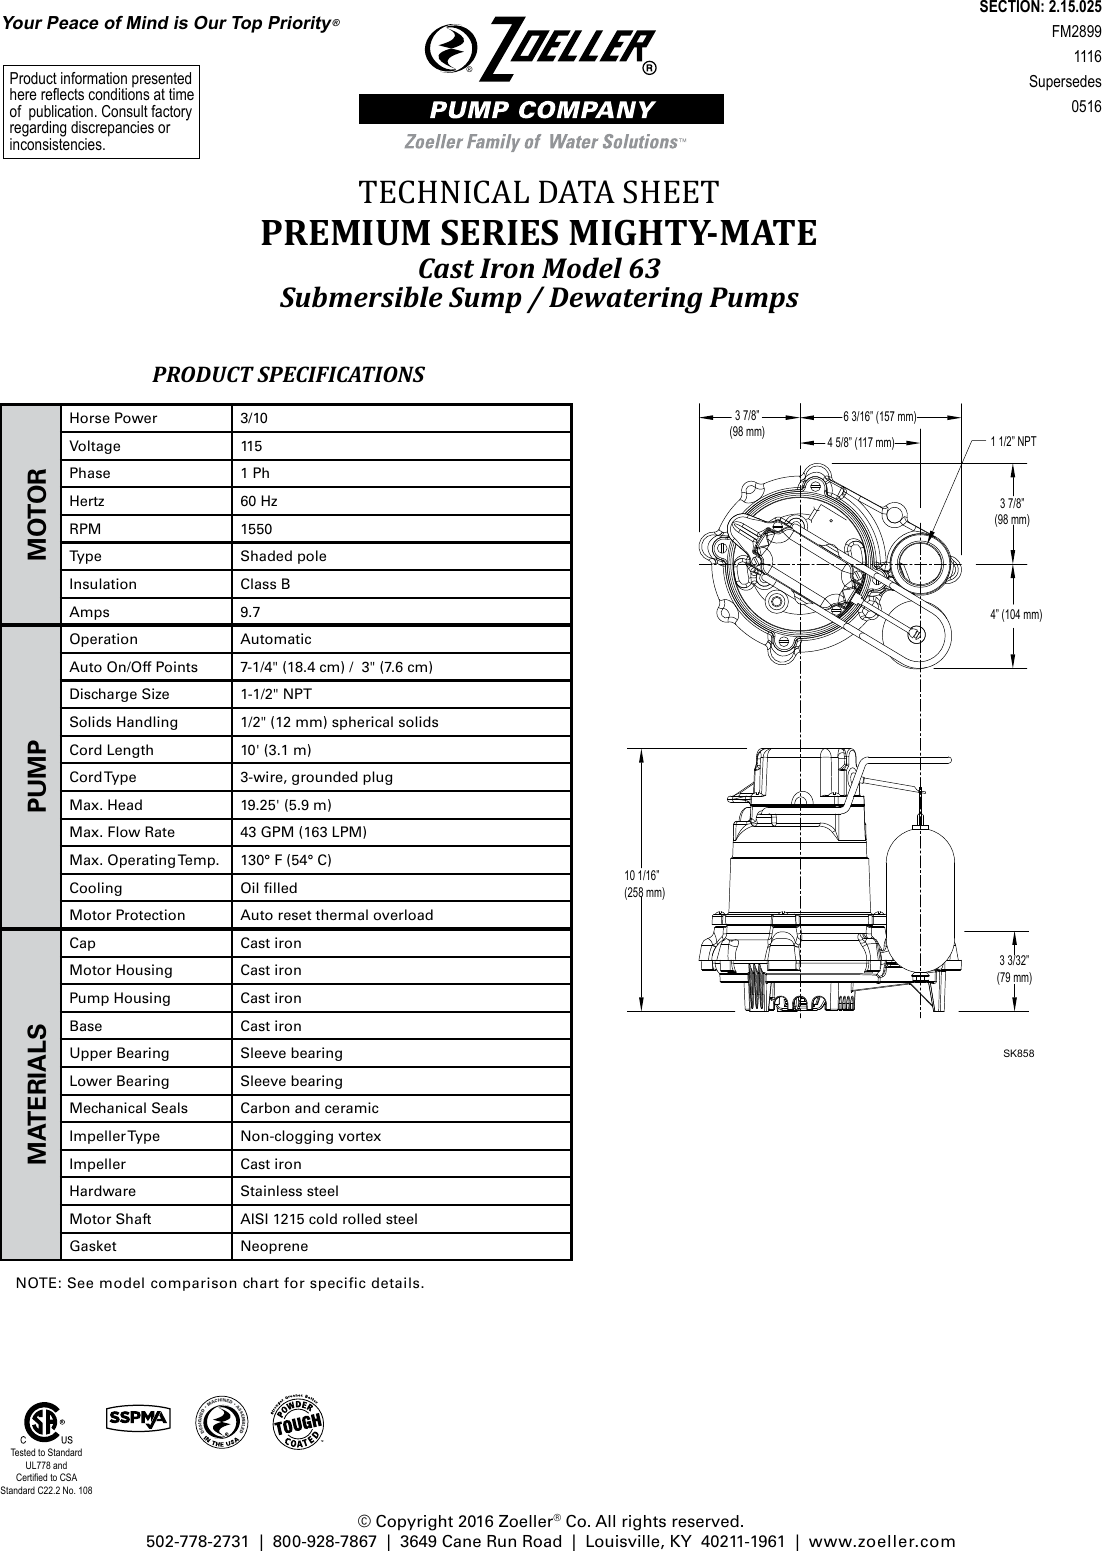 Page 1 of 2 - 551719 3 Zoeller M63 Technical Data Sheet